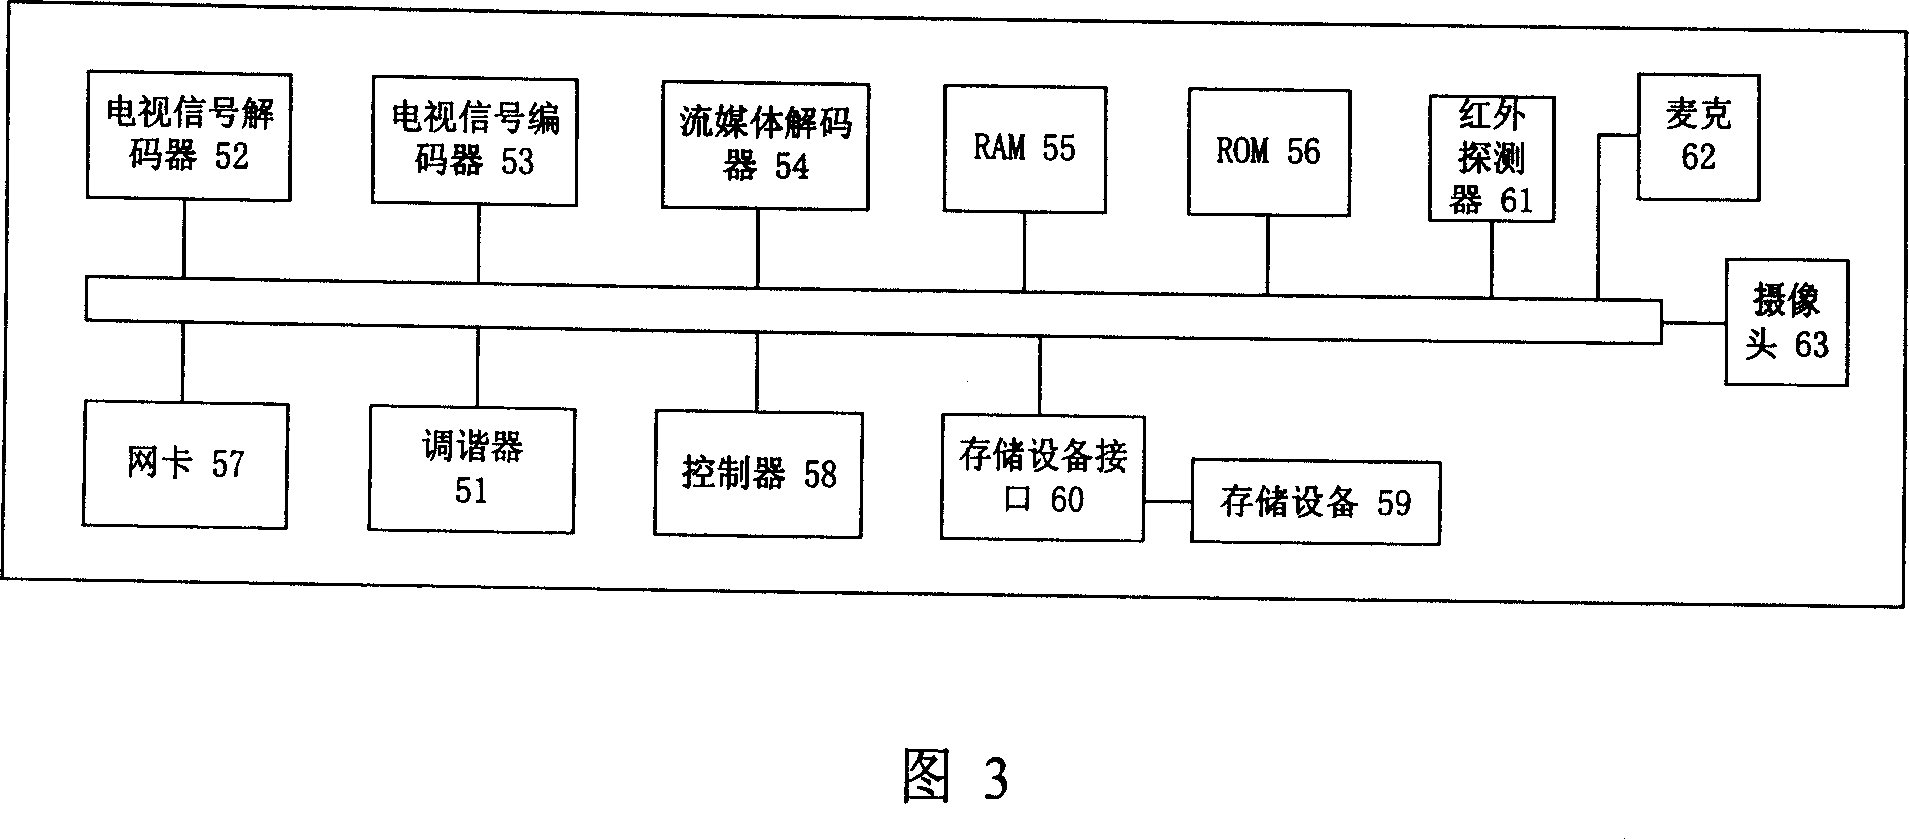 Method for intelligent control of television and intelligent control device